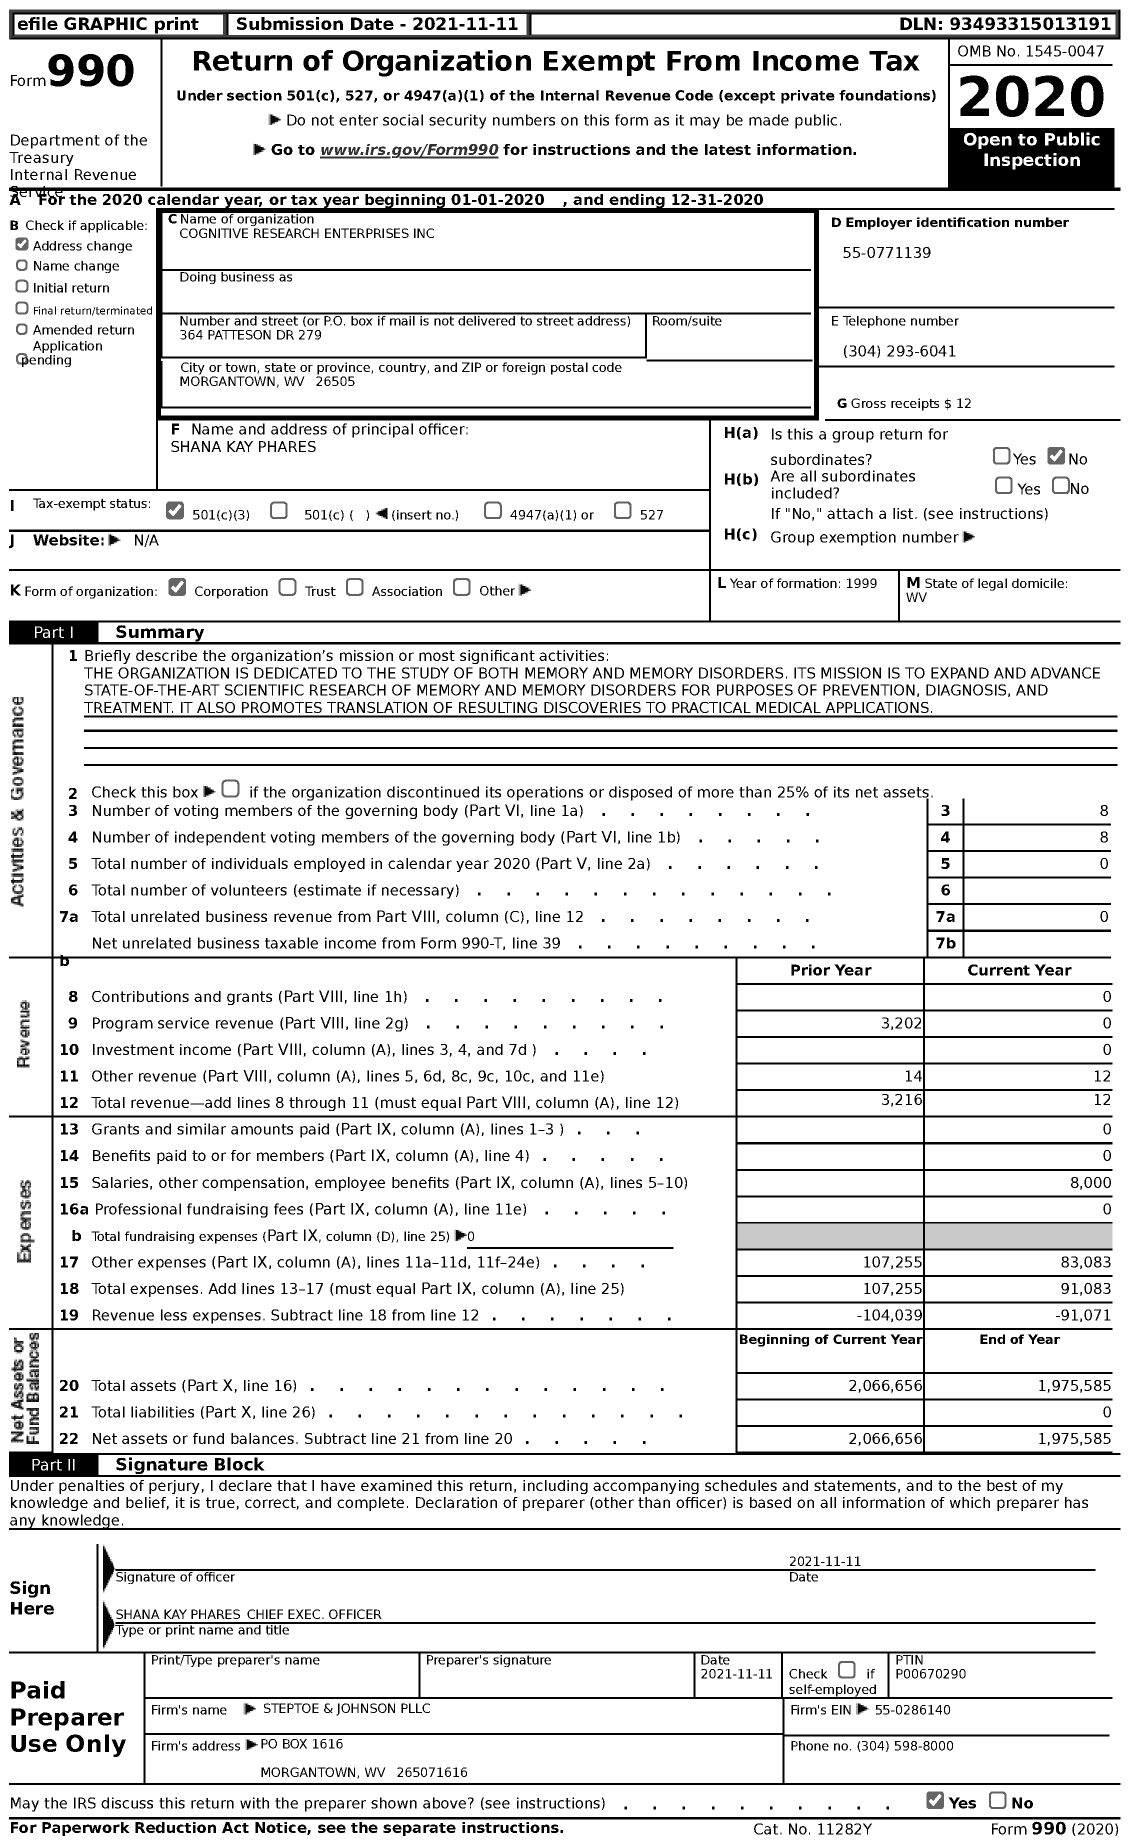 Image of first page of 2020 Form 990 for Cognitive Research Enterprises